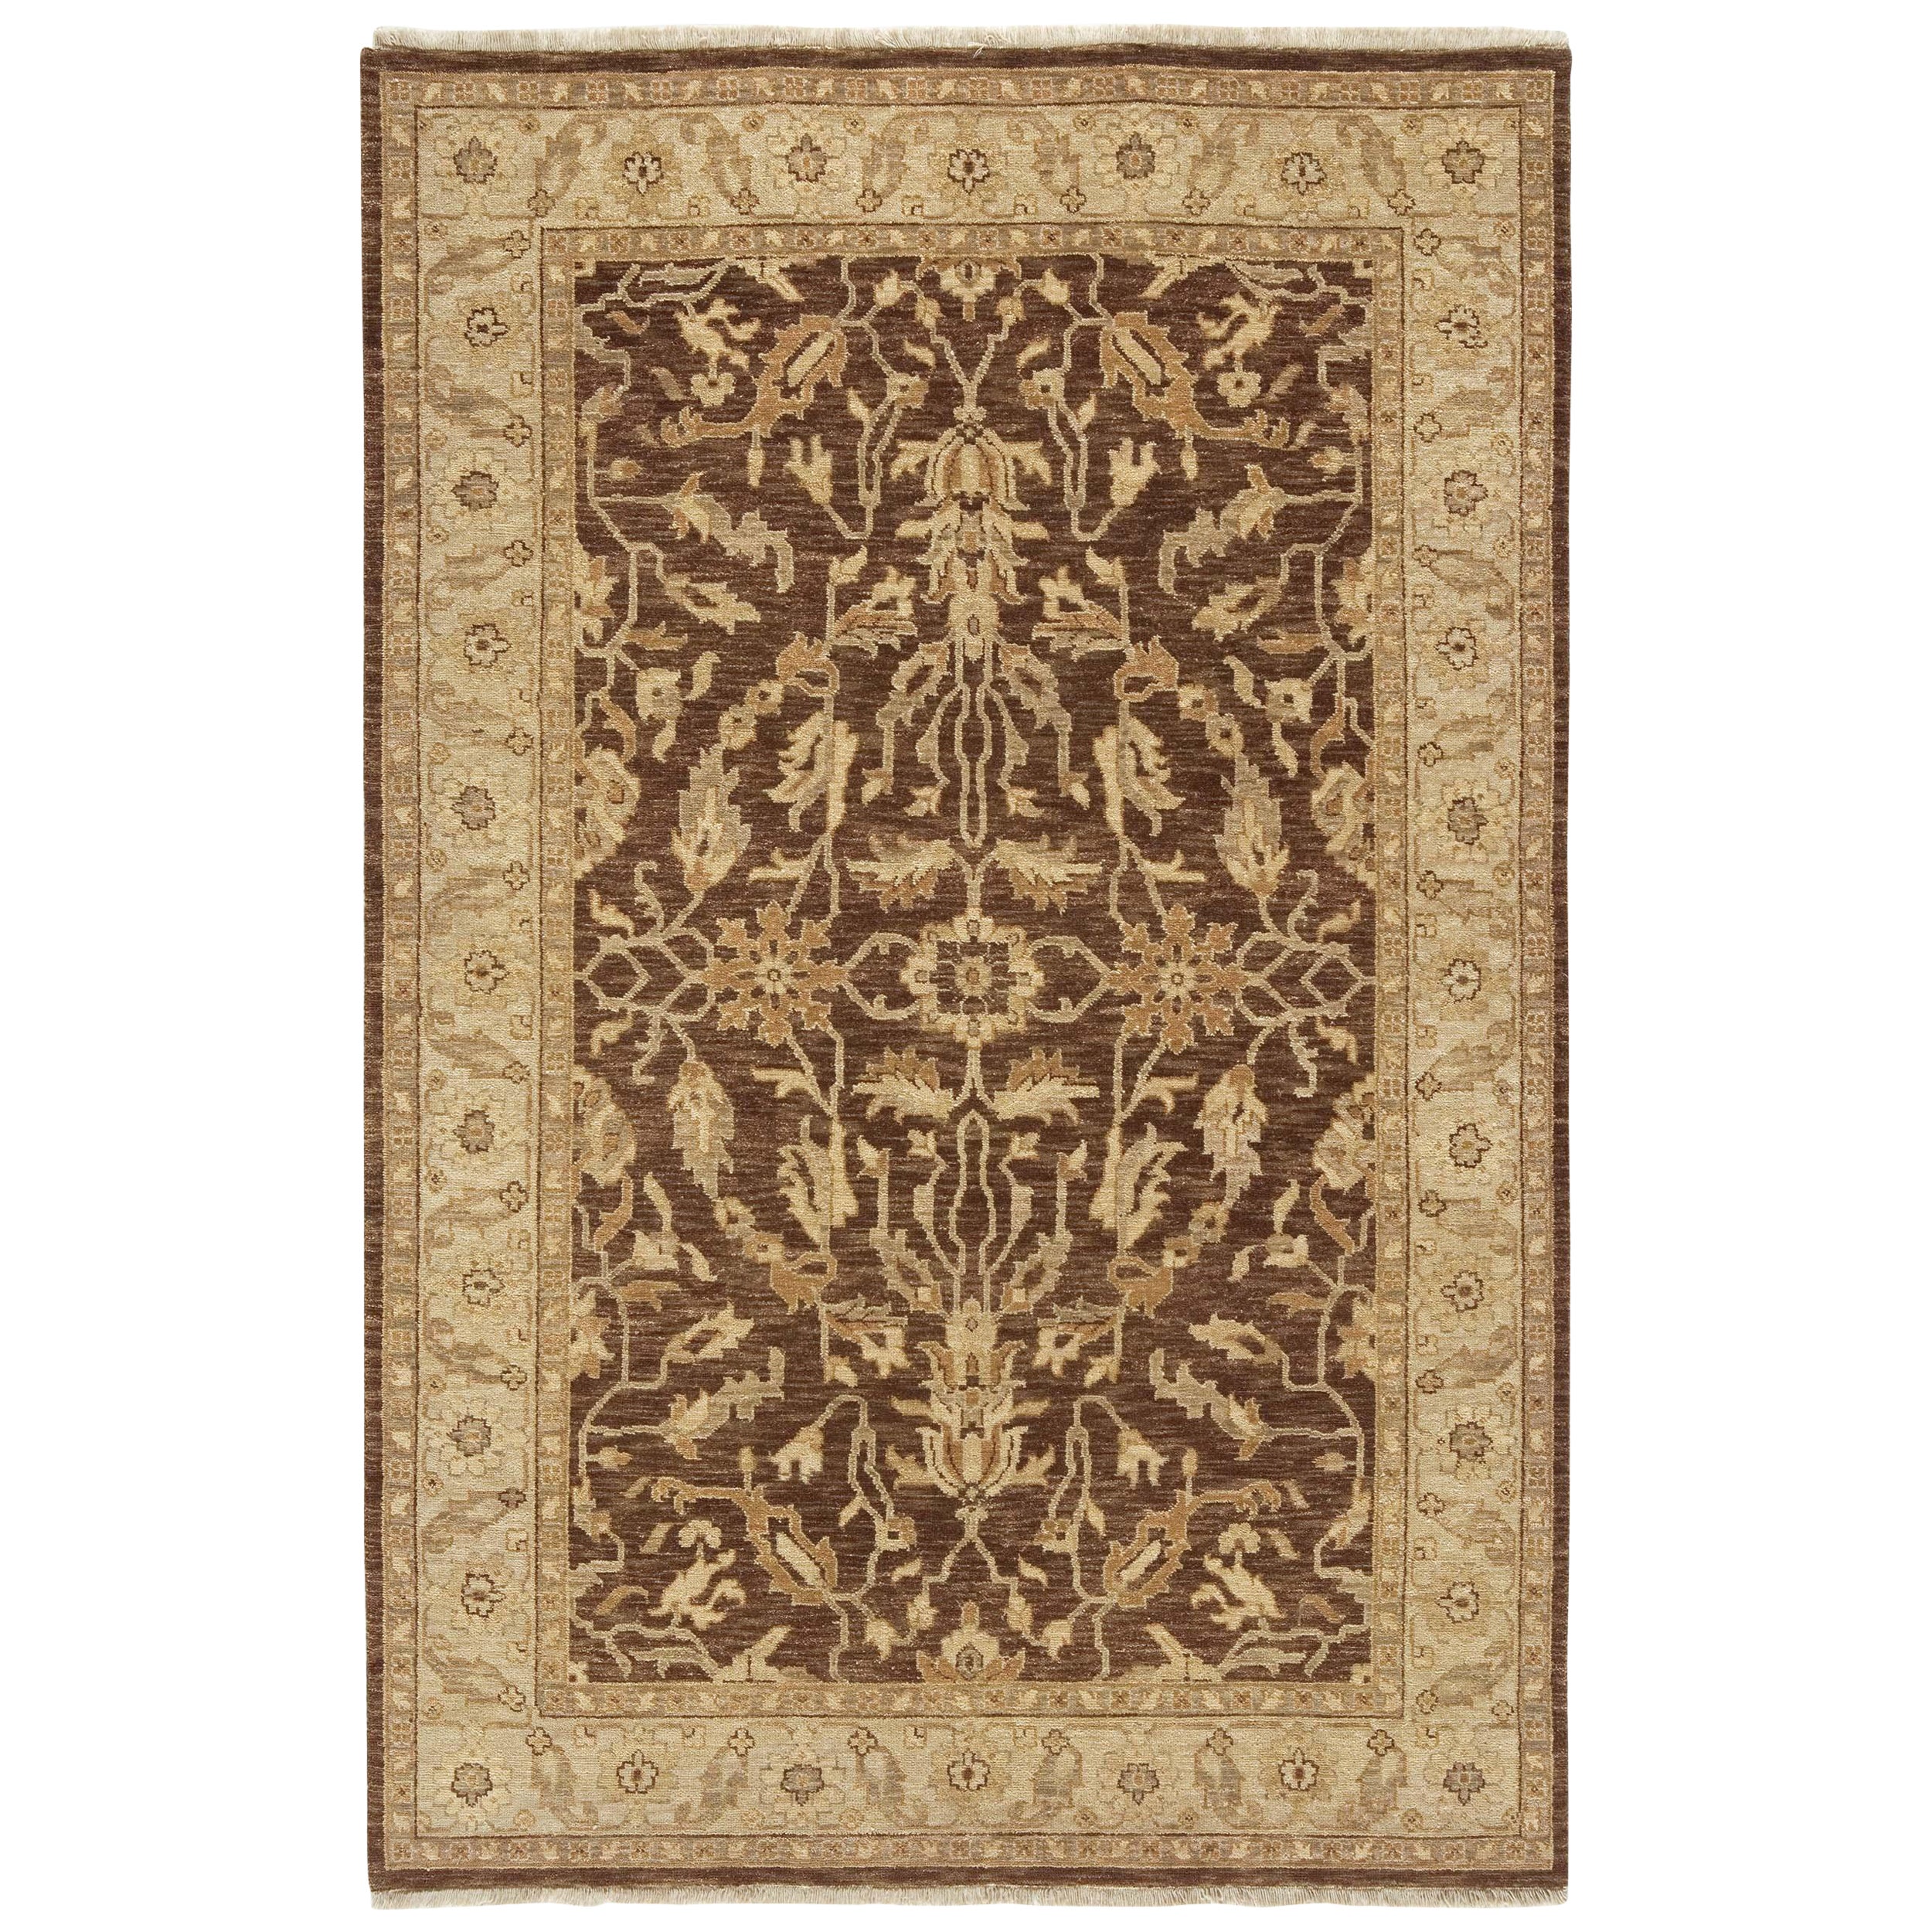 Luxury Traditional Hand-Knotted Oushak Brown & Beige 14x24 Rug